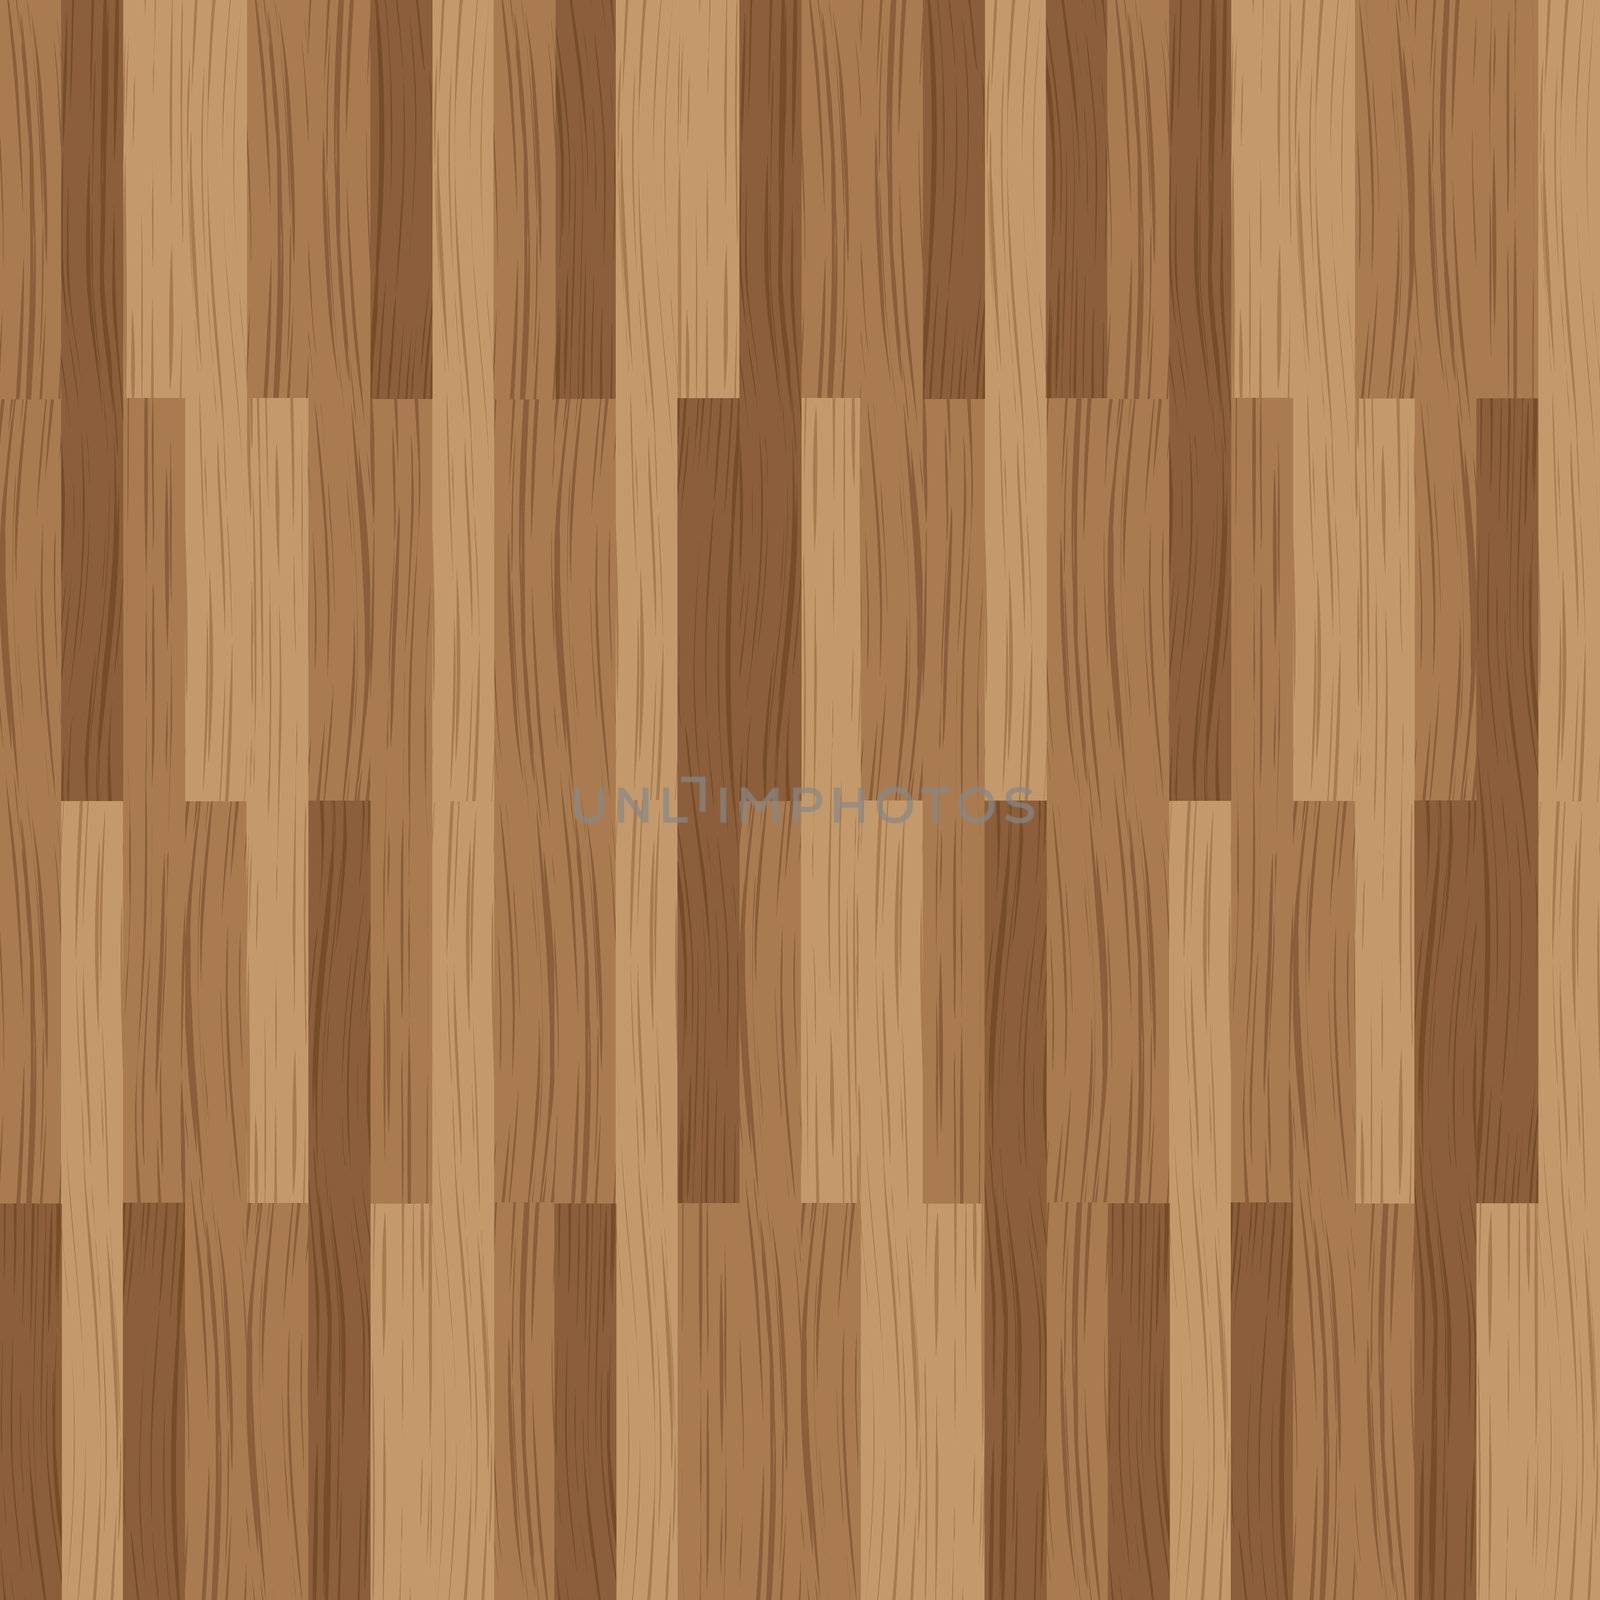 Abstract wooded tile with a plank design in brown